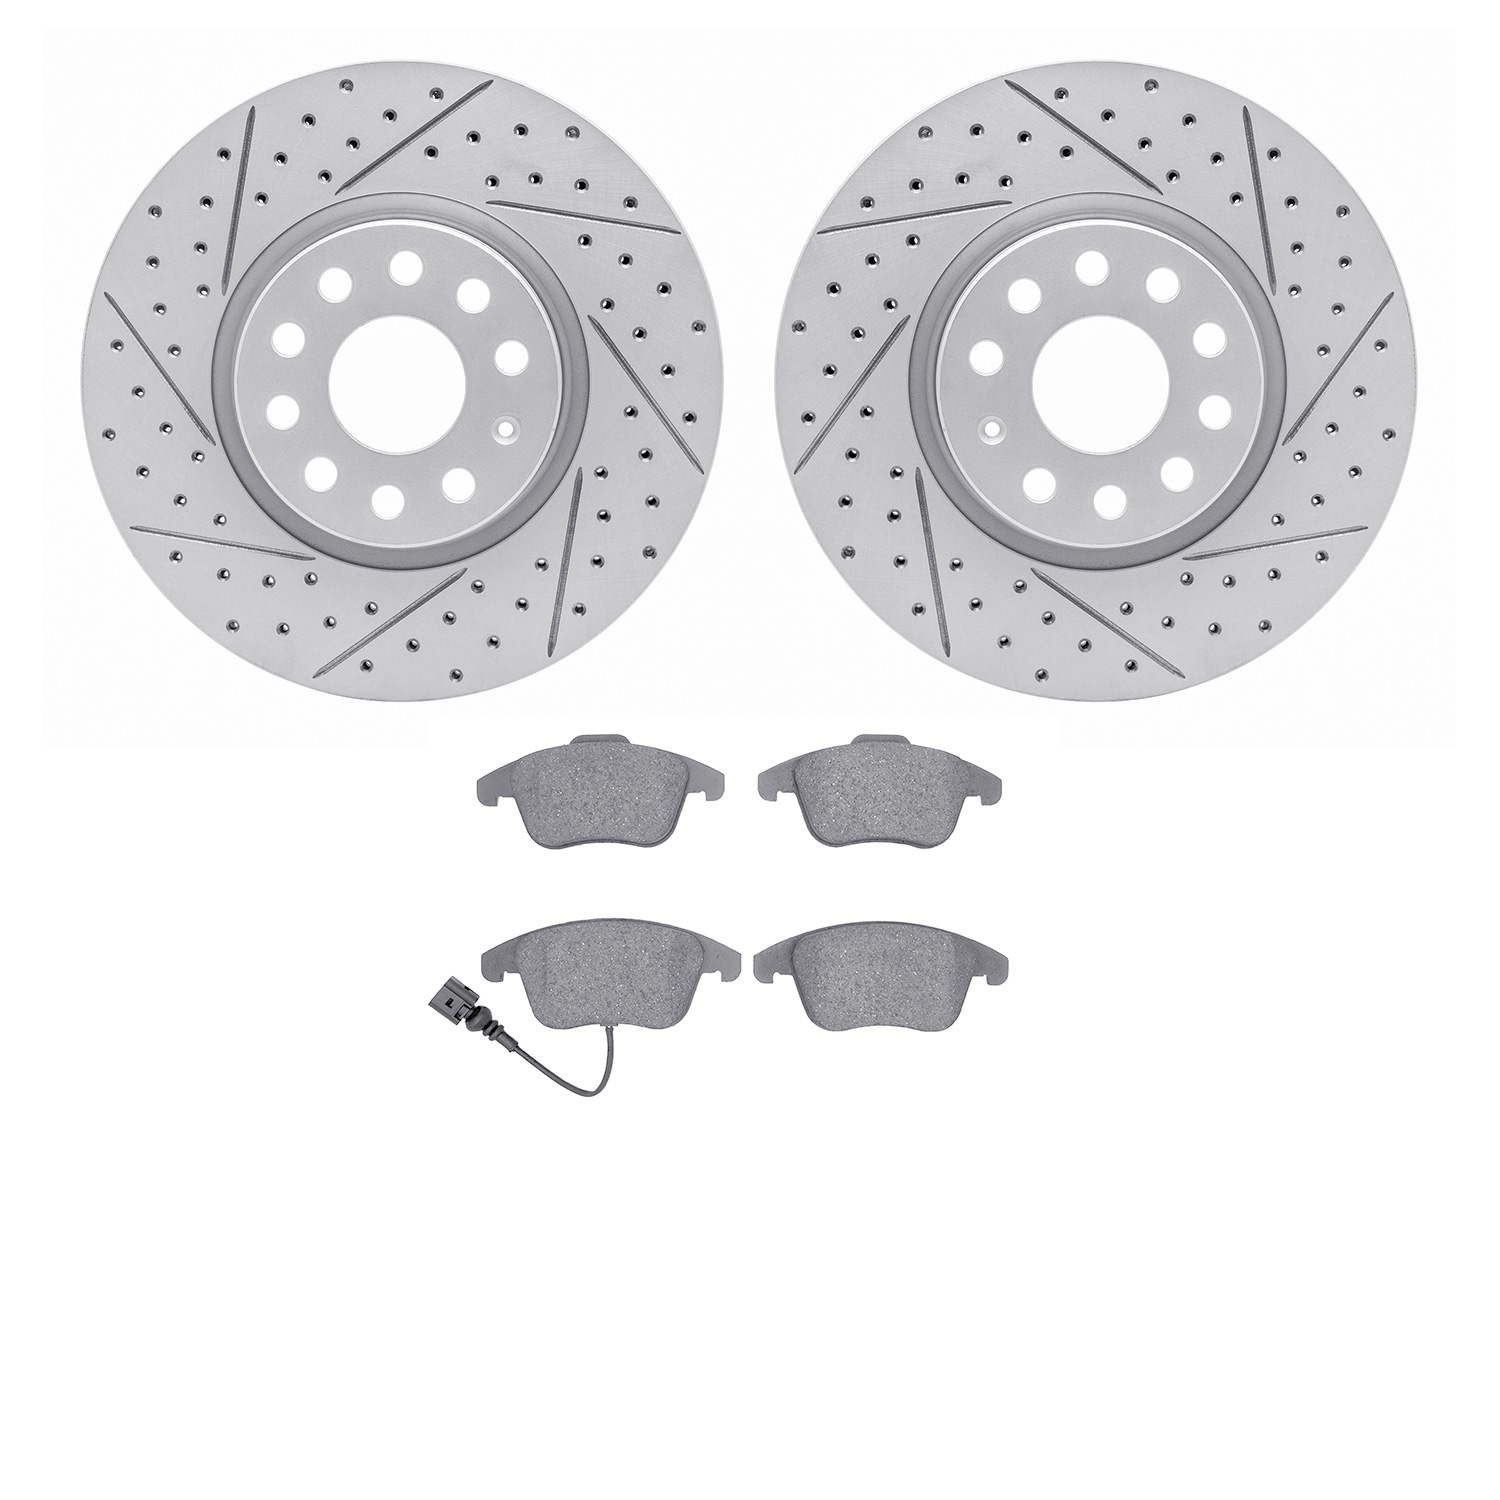 2502-74075 Geoperformance Drilled/Slotted Rotors w/5000 Advanced Brake Pads Kit, 2012-2020 Audi/Volkswagen, Position: Front